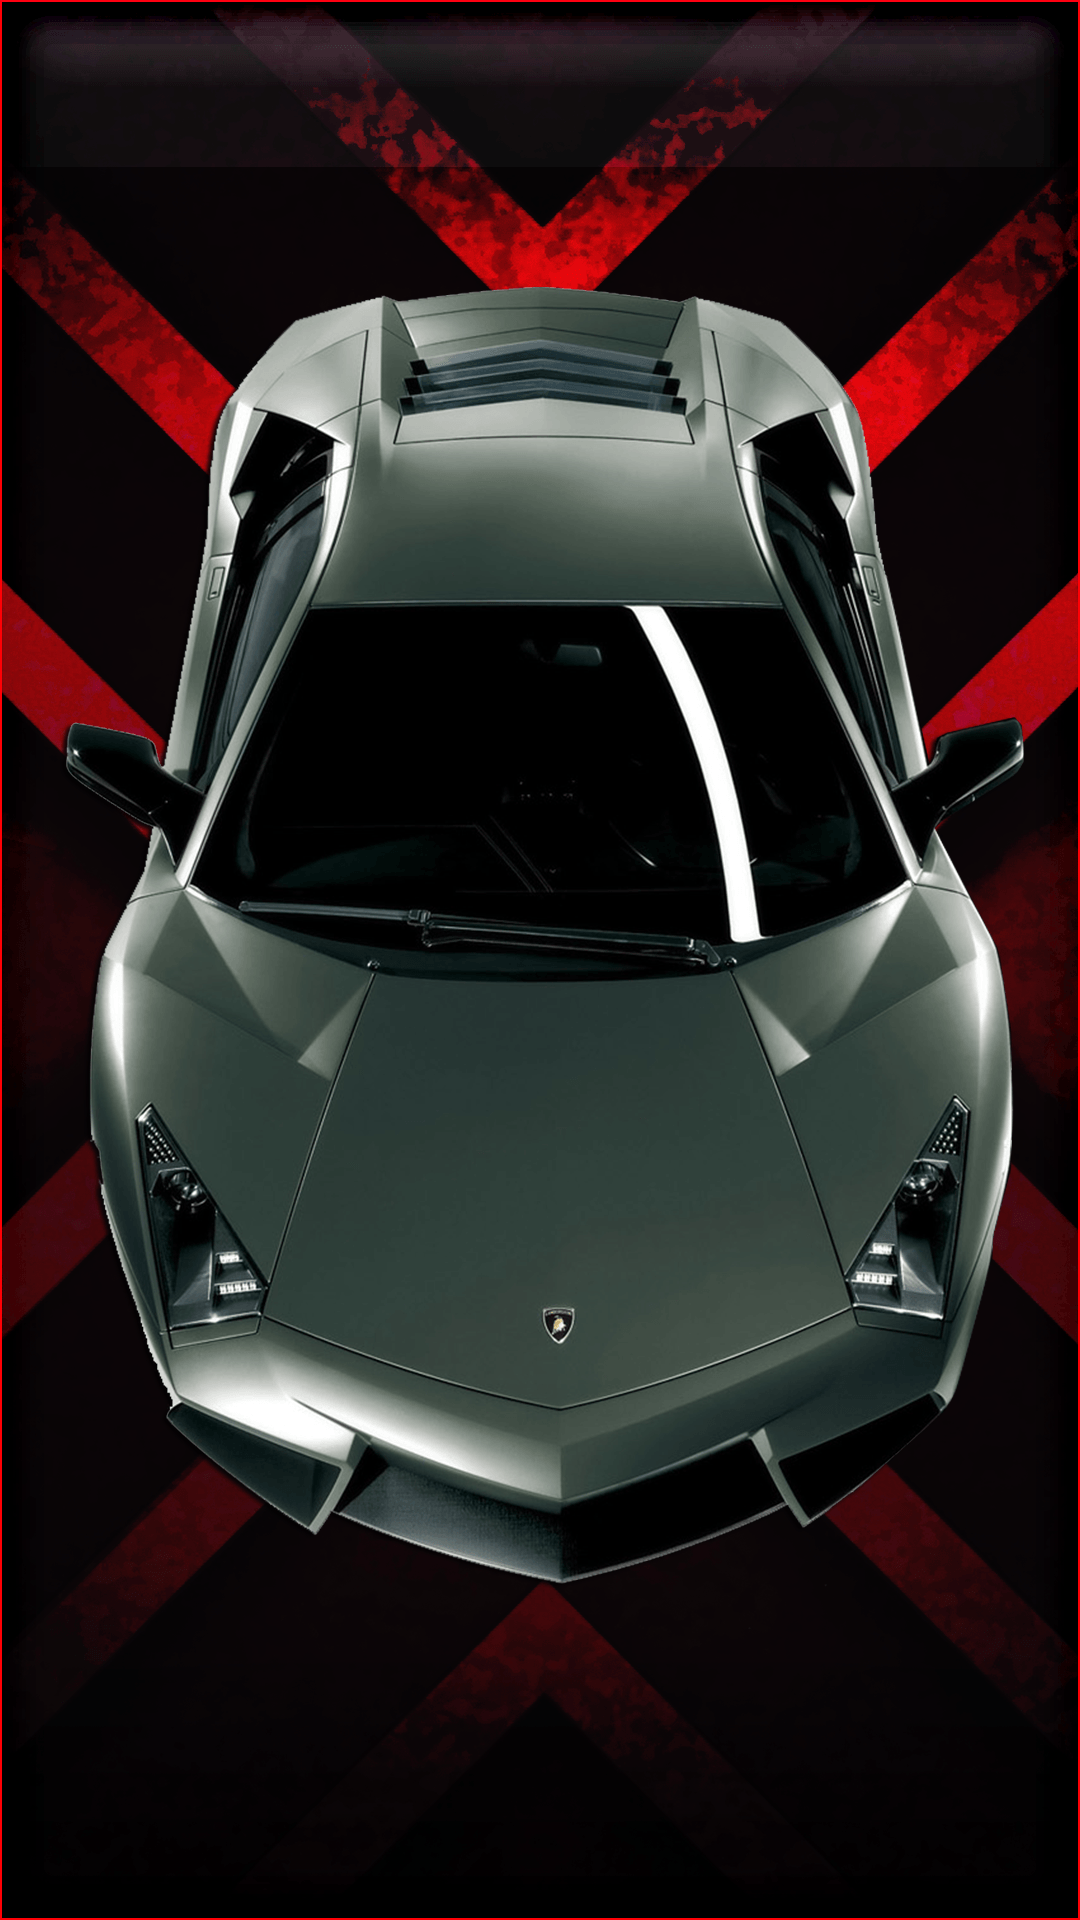 Download Our HD Lamborghini Car Wallpaper For Android